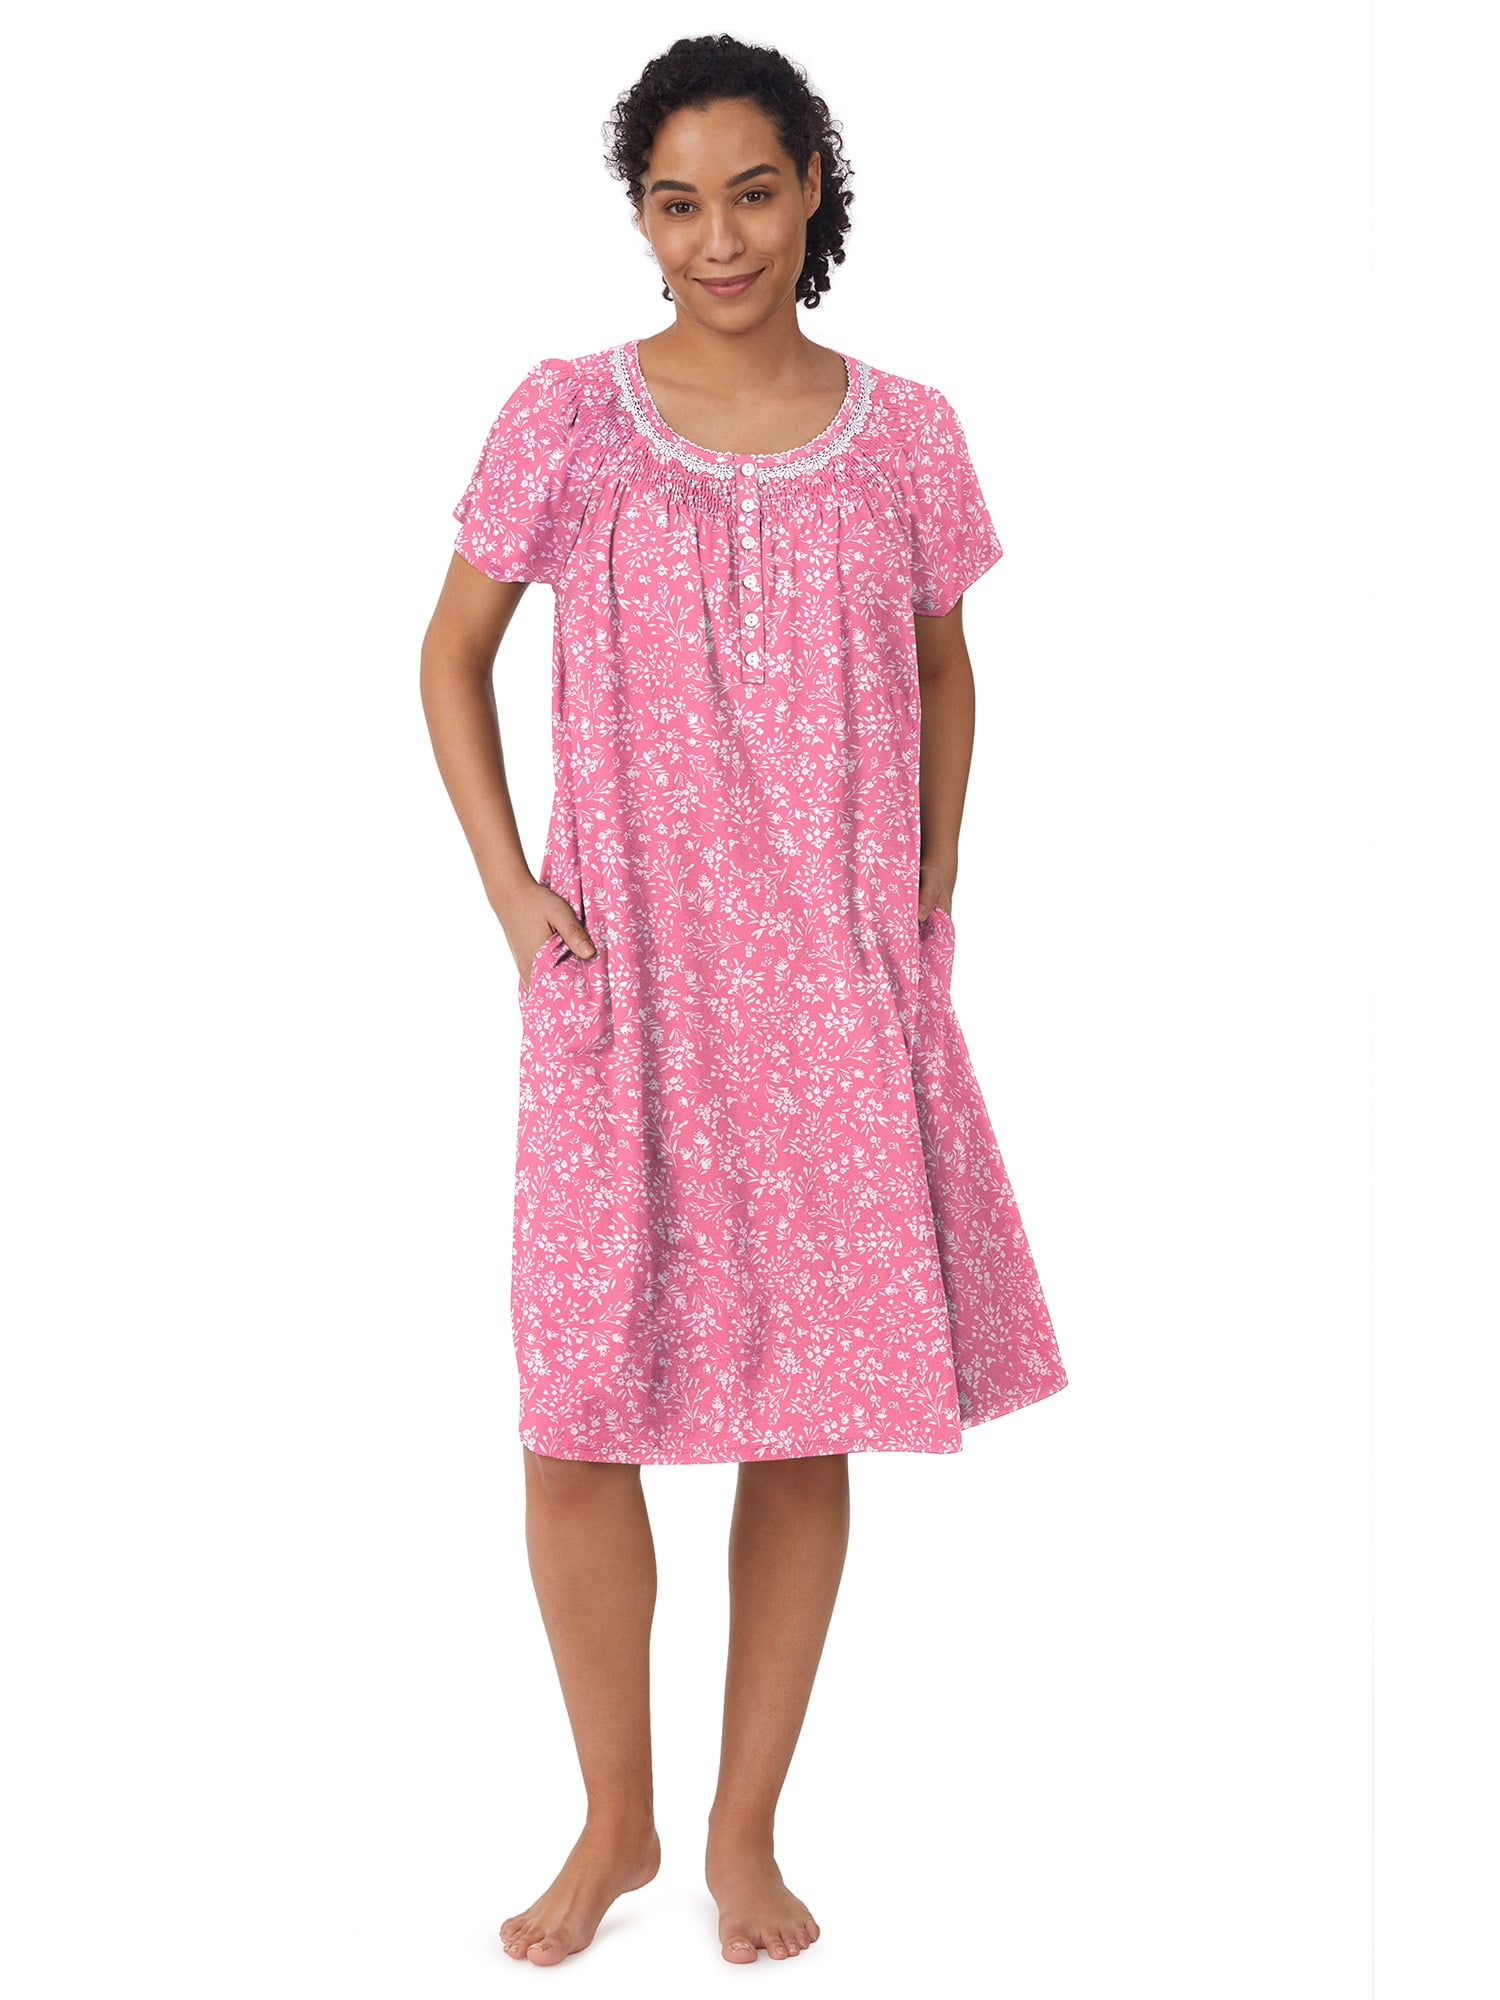 night gown for women